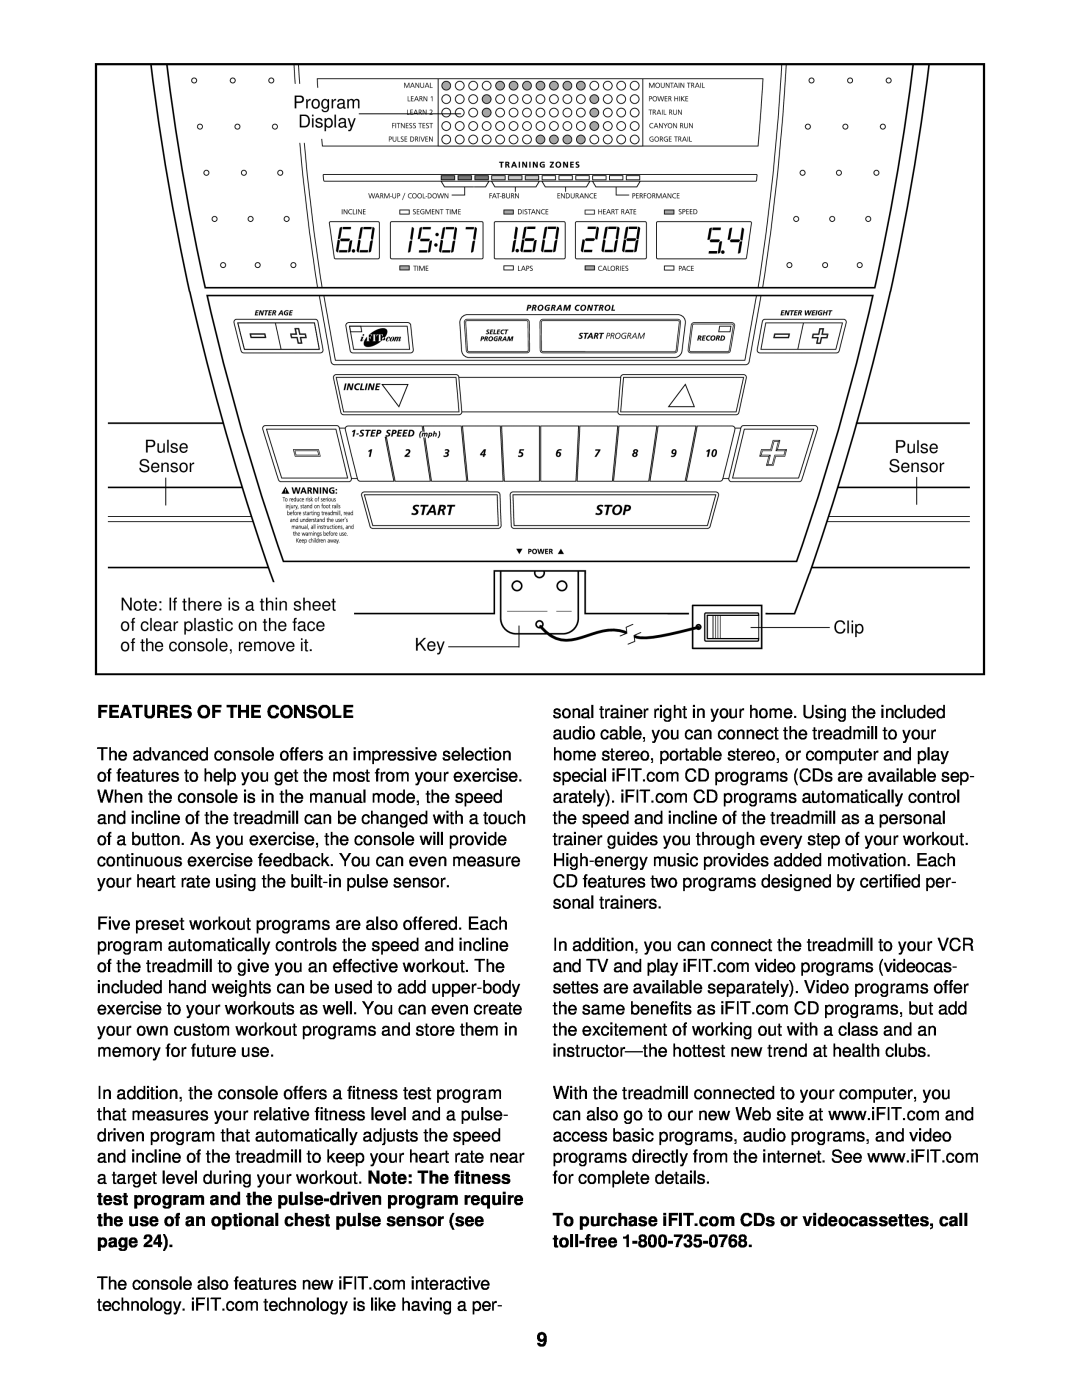 NordicTrack NTTL10510 user manual Features Of The Console, To purchase iFIT.com CDs or videocassettes, call toll-free 